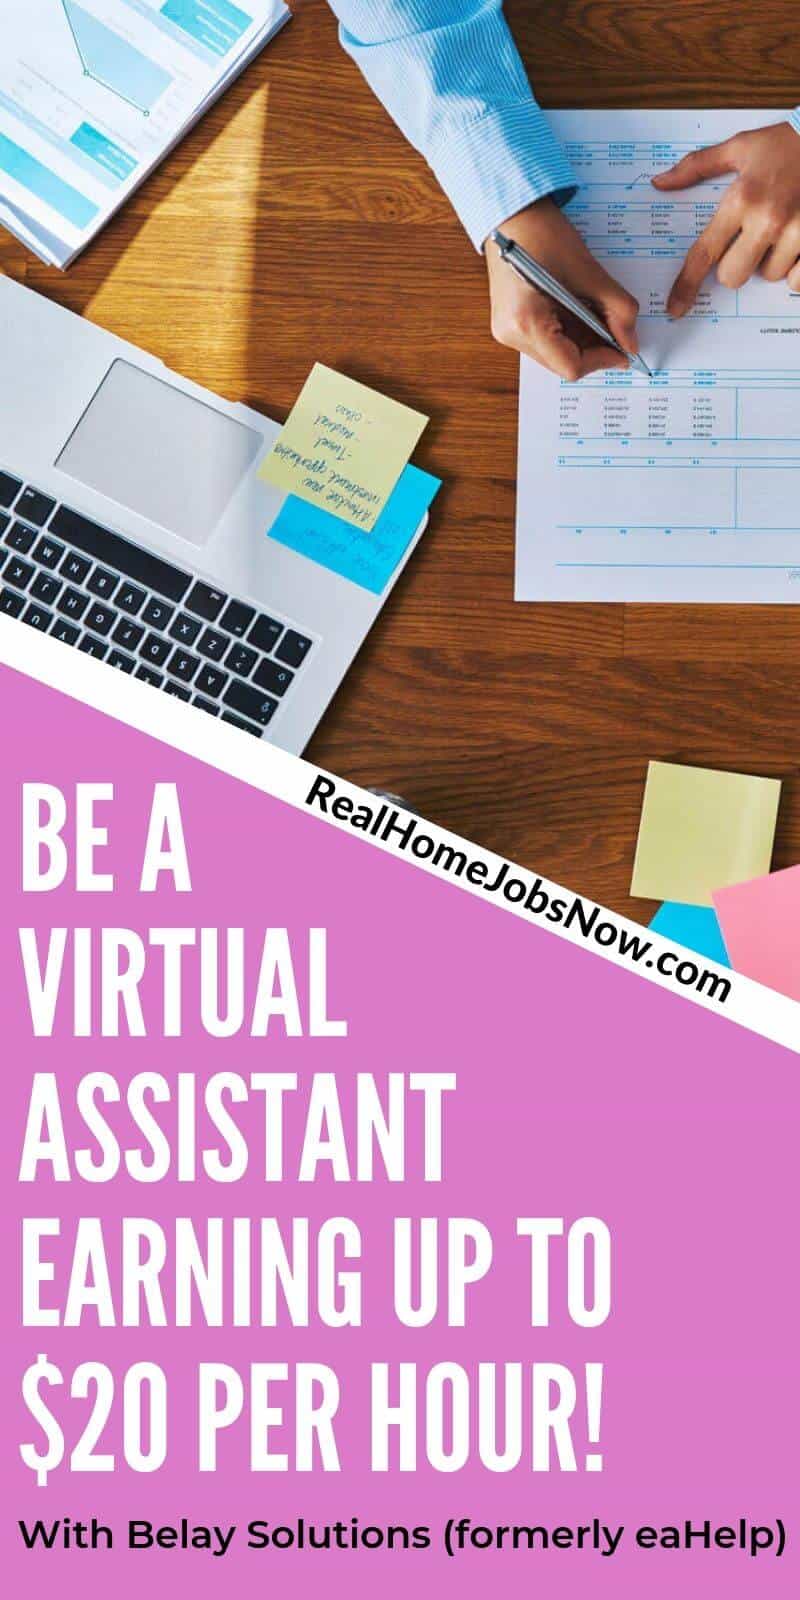 If you are looking for virtual assistant jobs at home, look no further than Belay (formerly eaHelp). Virtual assistants can work part-time or full-time schedules and earn up to $20 per hour!  #virtualassistantjobs #virtualassistant #becomeavirtualassistant #makemoneyonlinefree #earnmoneyfromhome #onlinejobsfromhome #makemoneyideas  #parttimejobsfromhome #onlinejobs #workfromhomejobs #workathomejobs